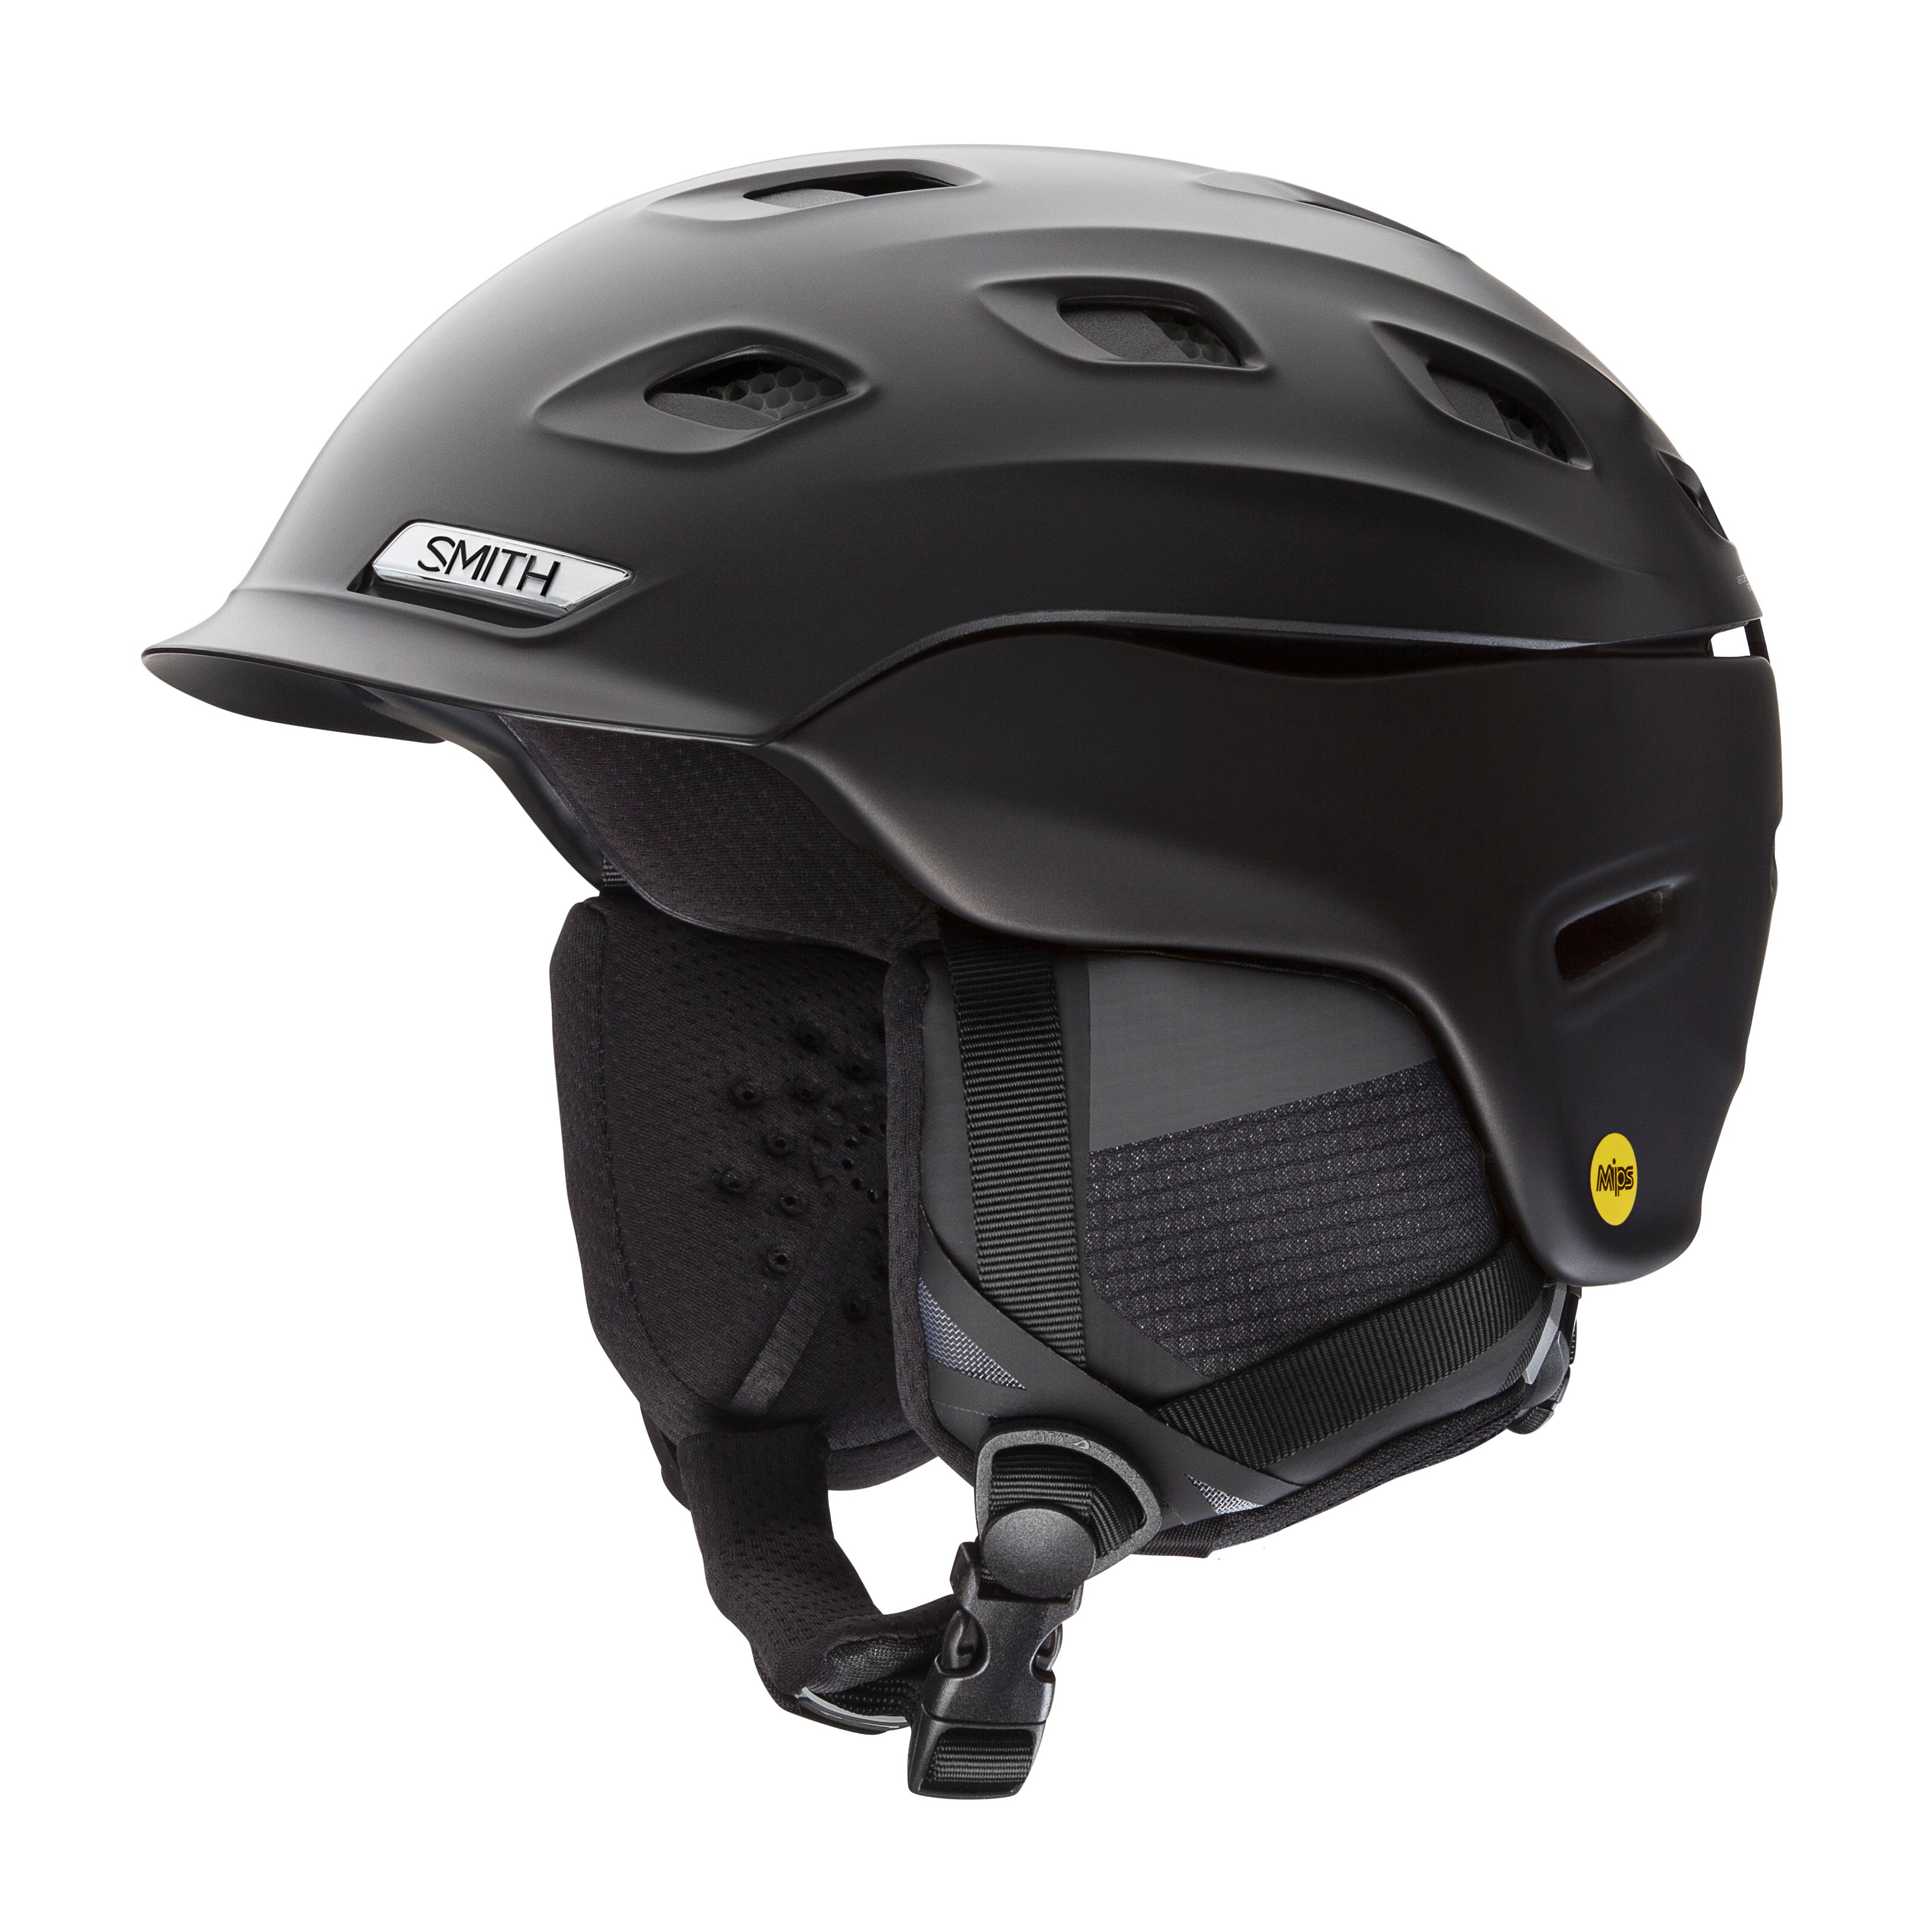 Black Smith helmet with MIPS, air vents, soft ear pieces. 